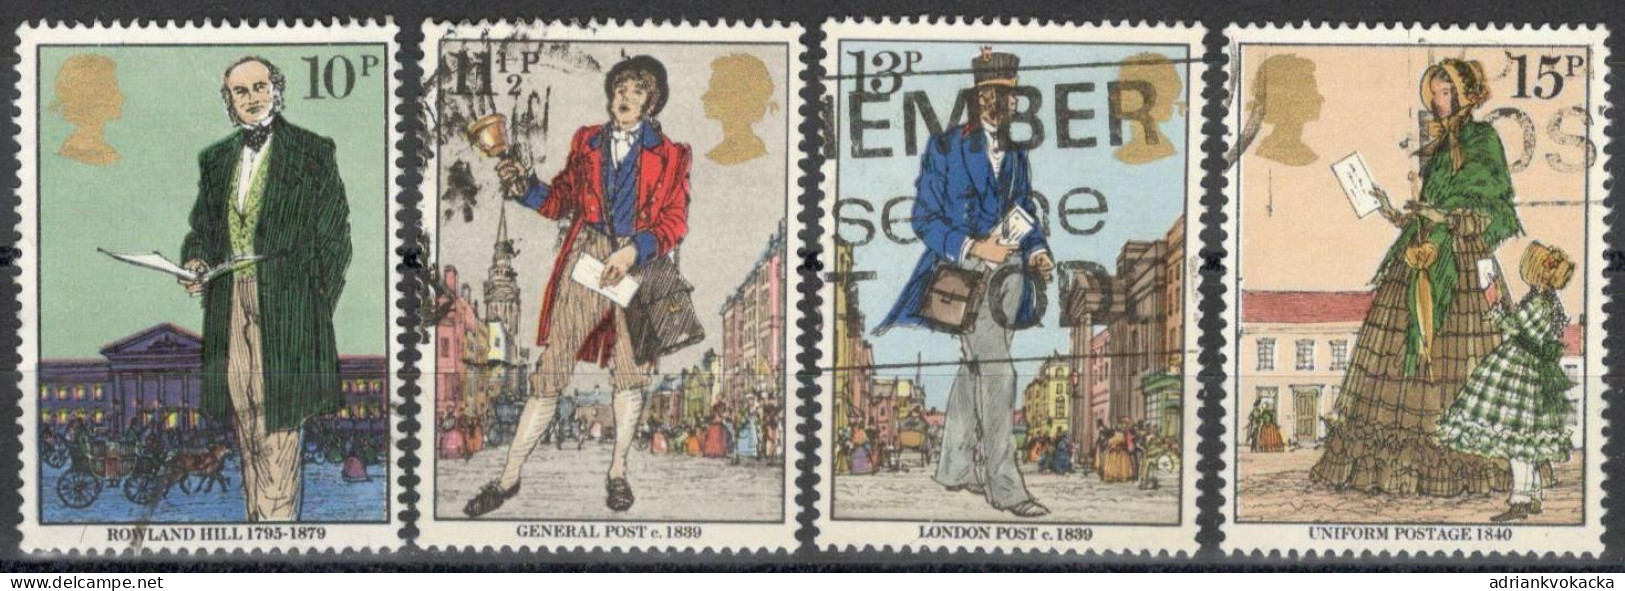 United Kingdom - Centenary Of The Death Of Sir Rowland Hill, Complete Series Of Cancelled Stamps Mi:GB 804-807 (1979) - Gebraucht